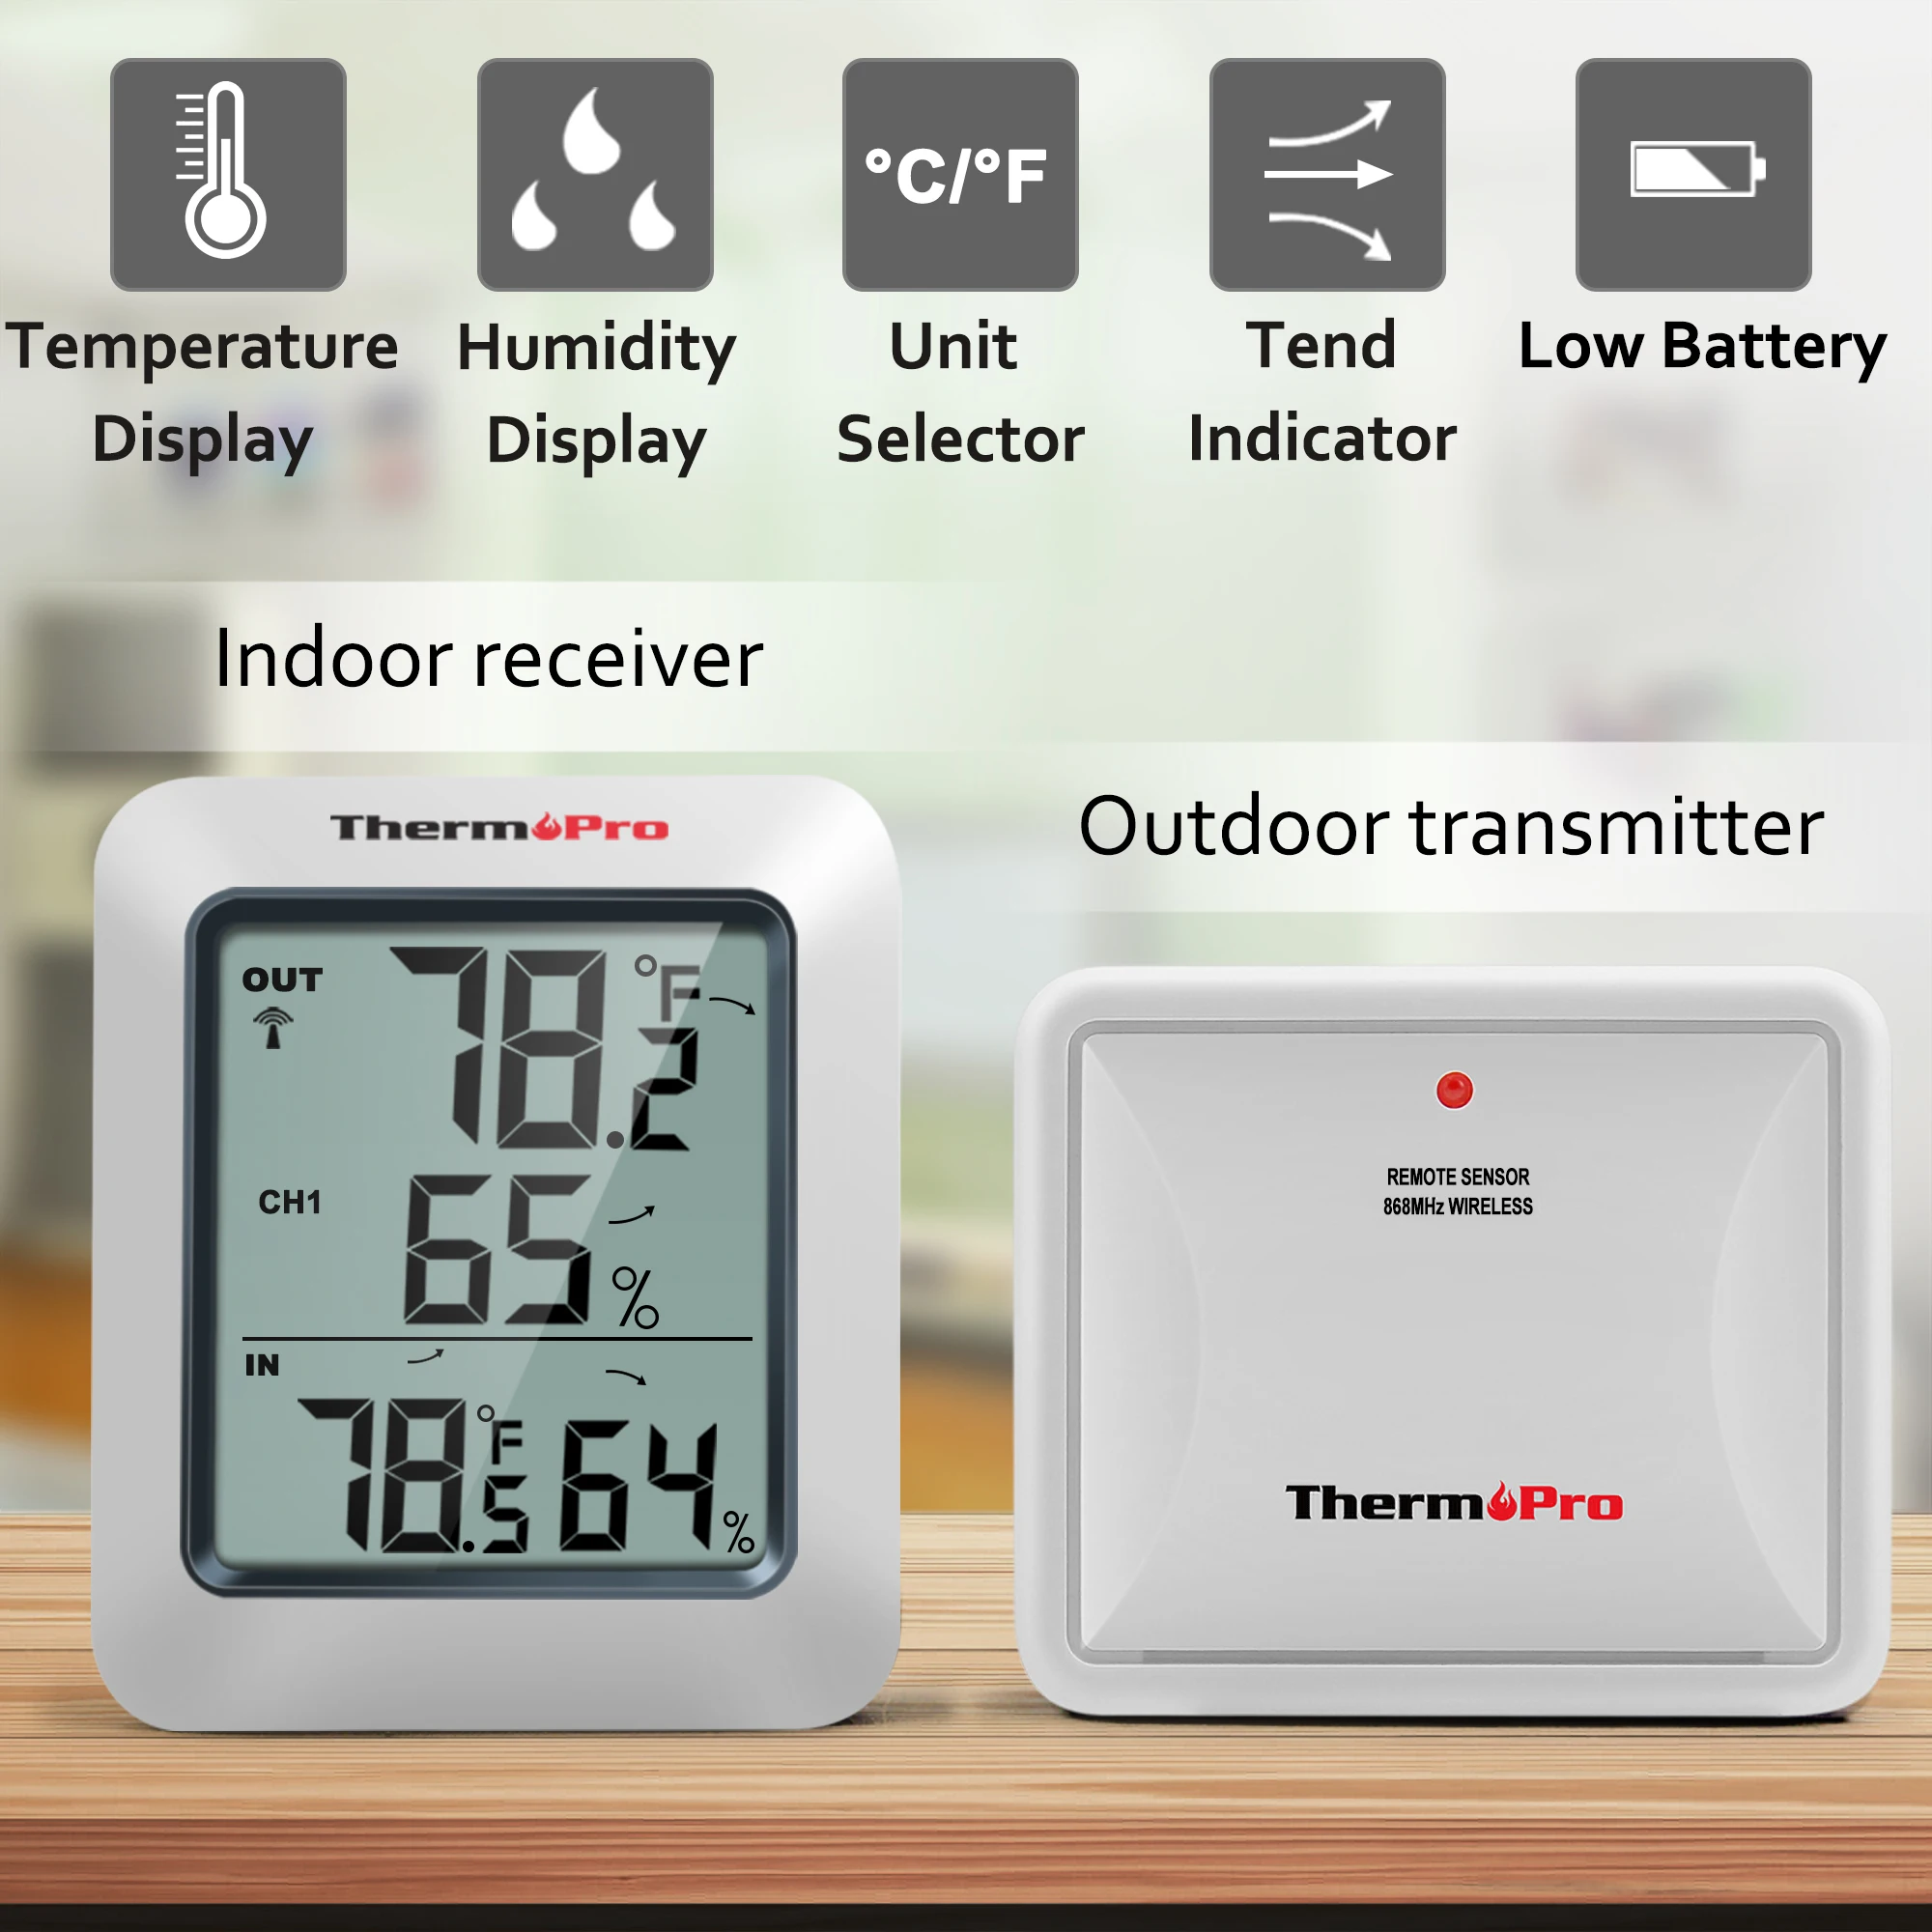 https://ae01.alicdn.com/kf/S38142ac251294061af26b55b7726895ez/ThermoPro-TP60C-60M-Wireless-Digital-Indoor-Outdoor-Thermometer-Hygrometer-Weather-Station-for-Home.jpg